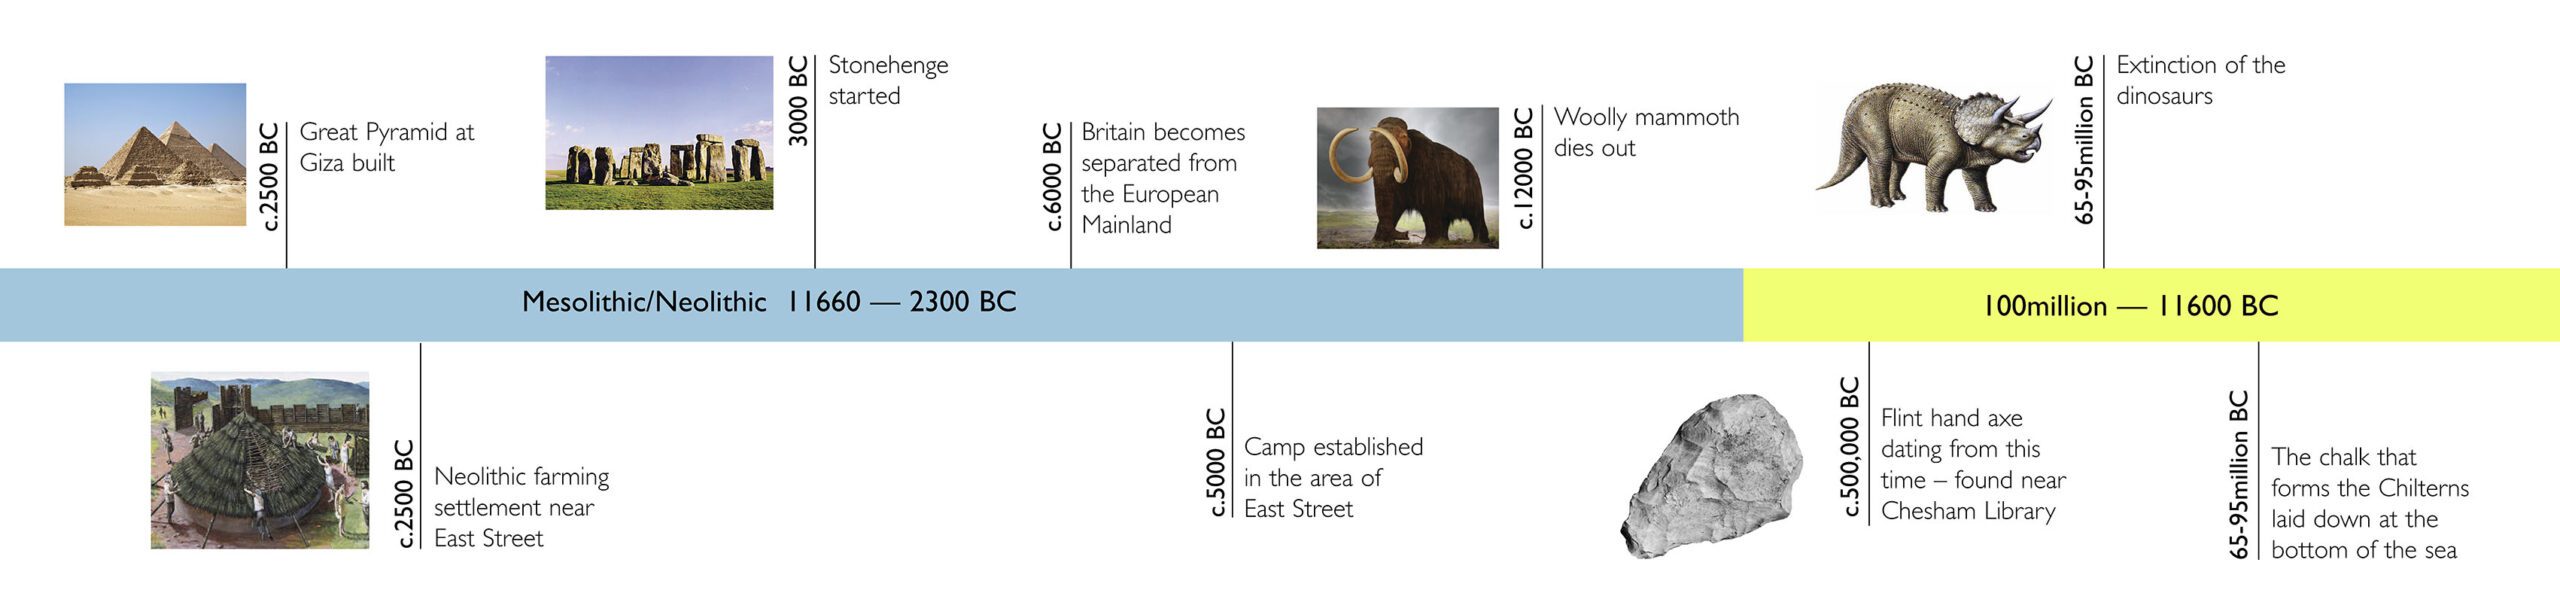 Mesolithic/Neolithic 100million - 11600BC